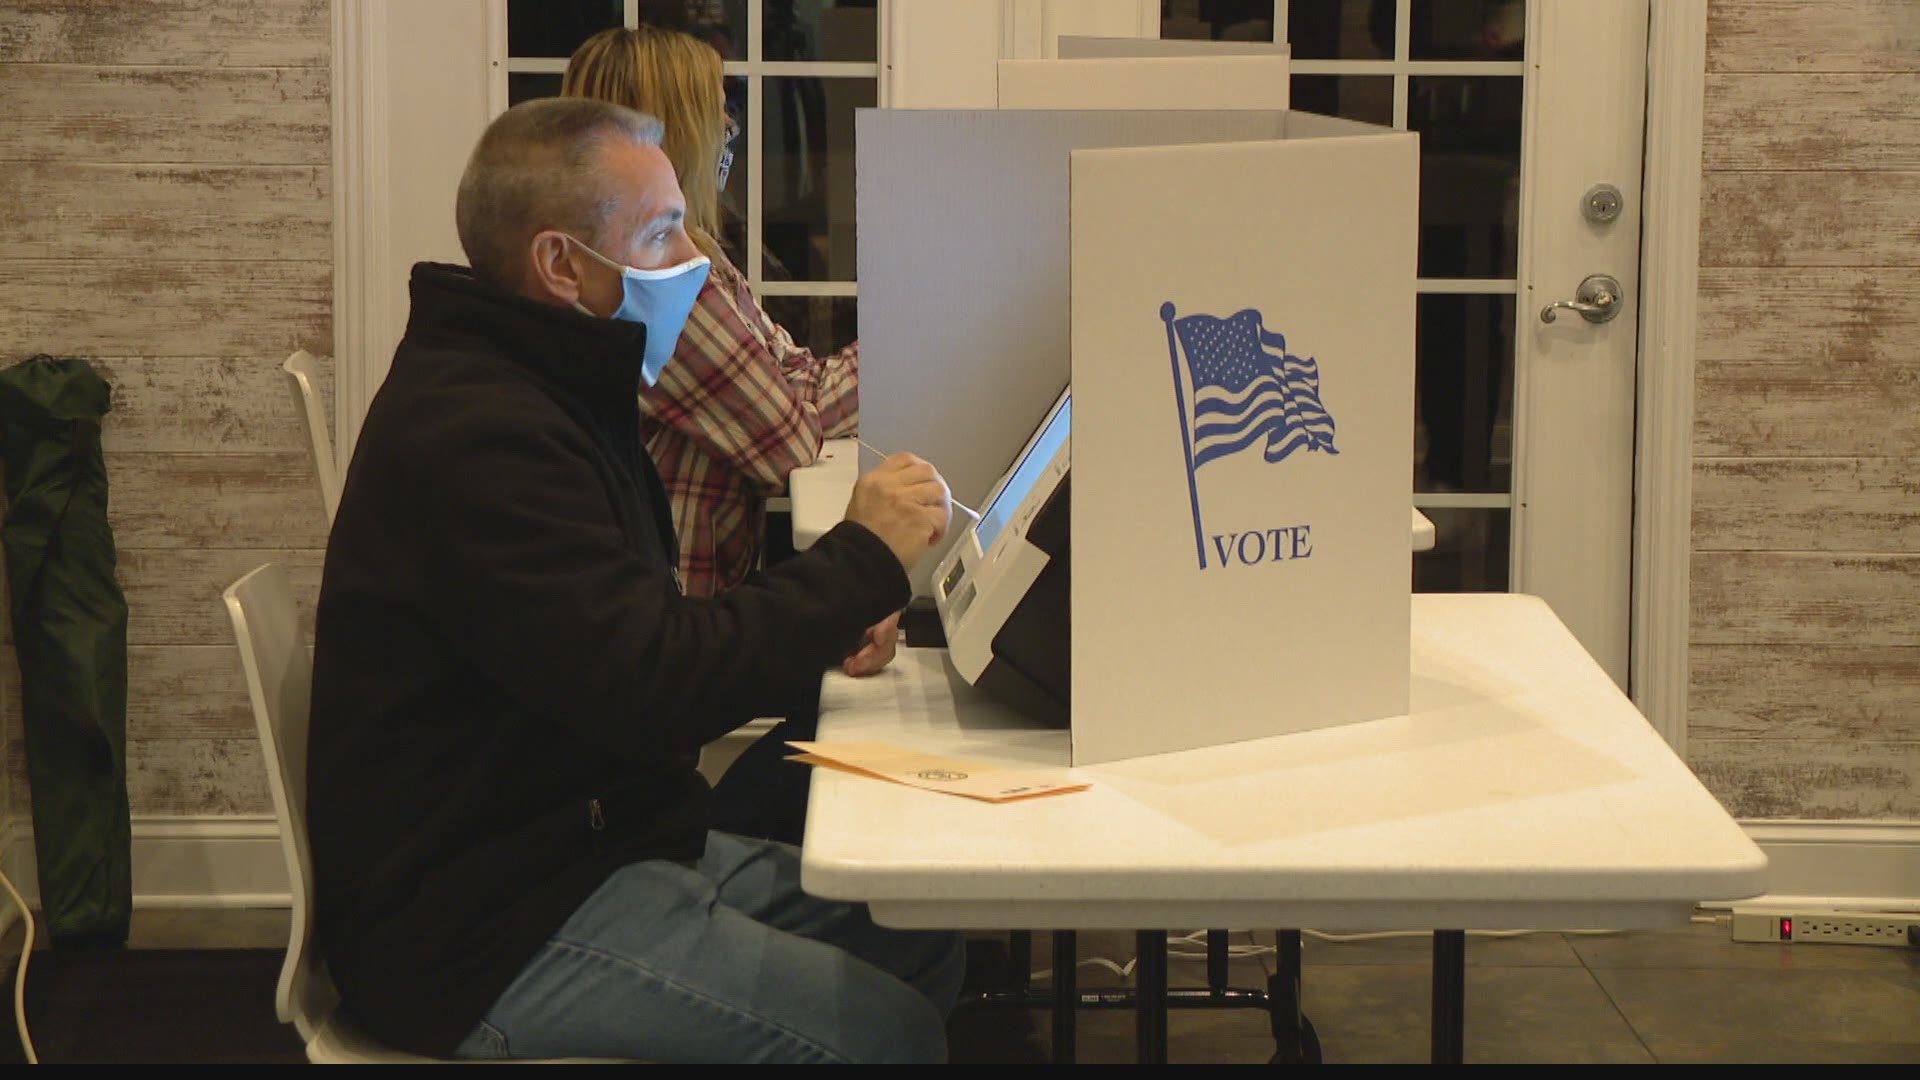 In Madison County, people waited in long lines for hours at multiple polling places. Rich Nye was in Madison County for late night voting and went back for answers.